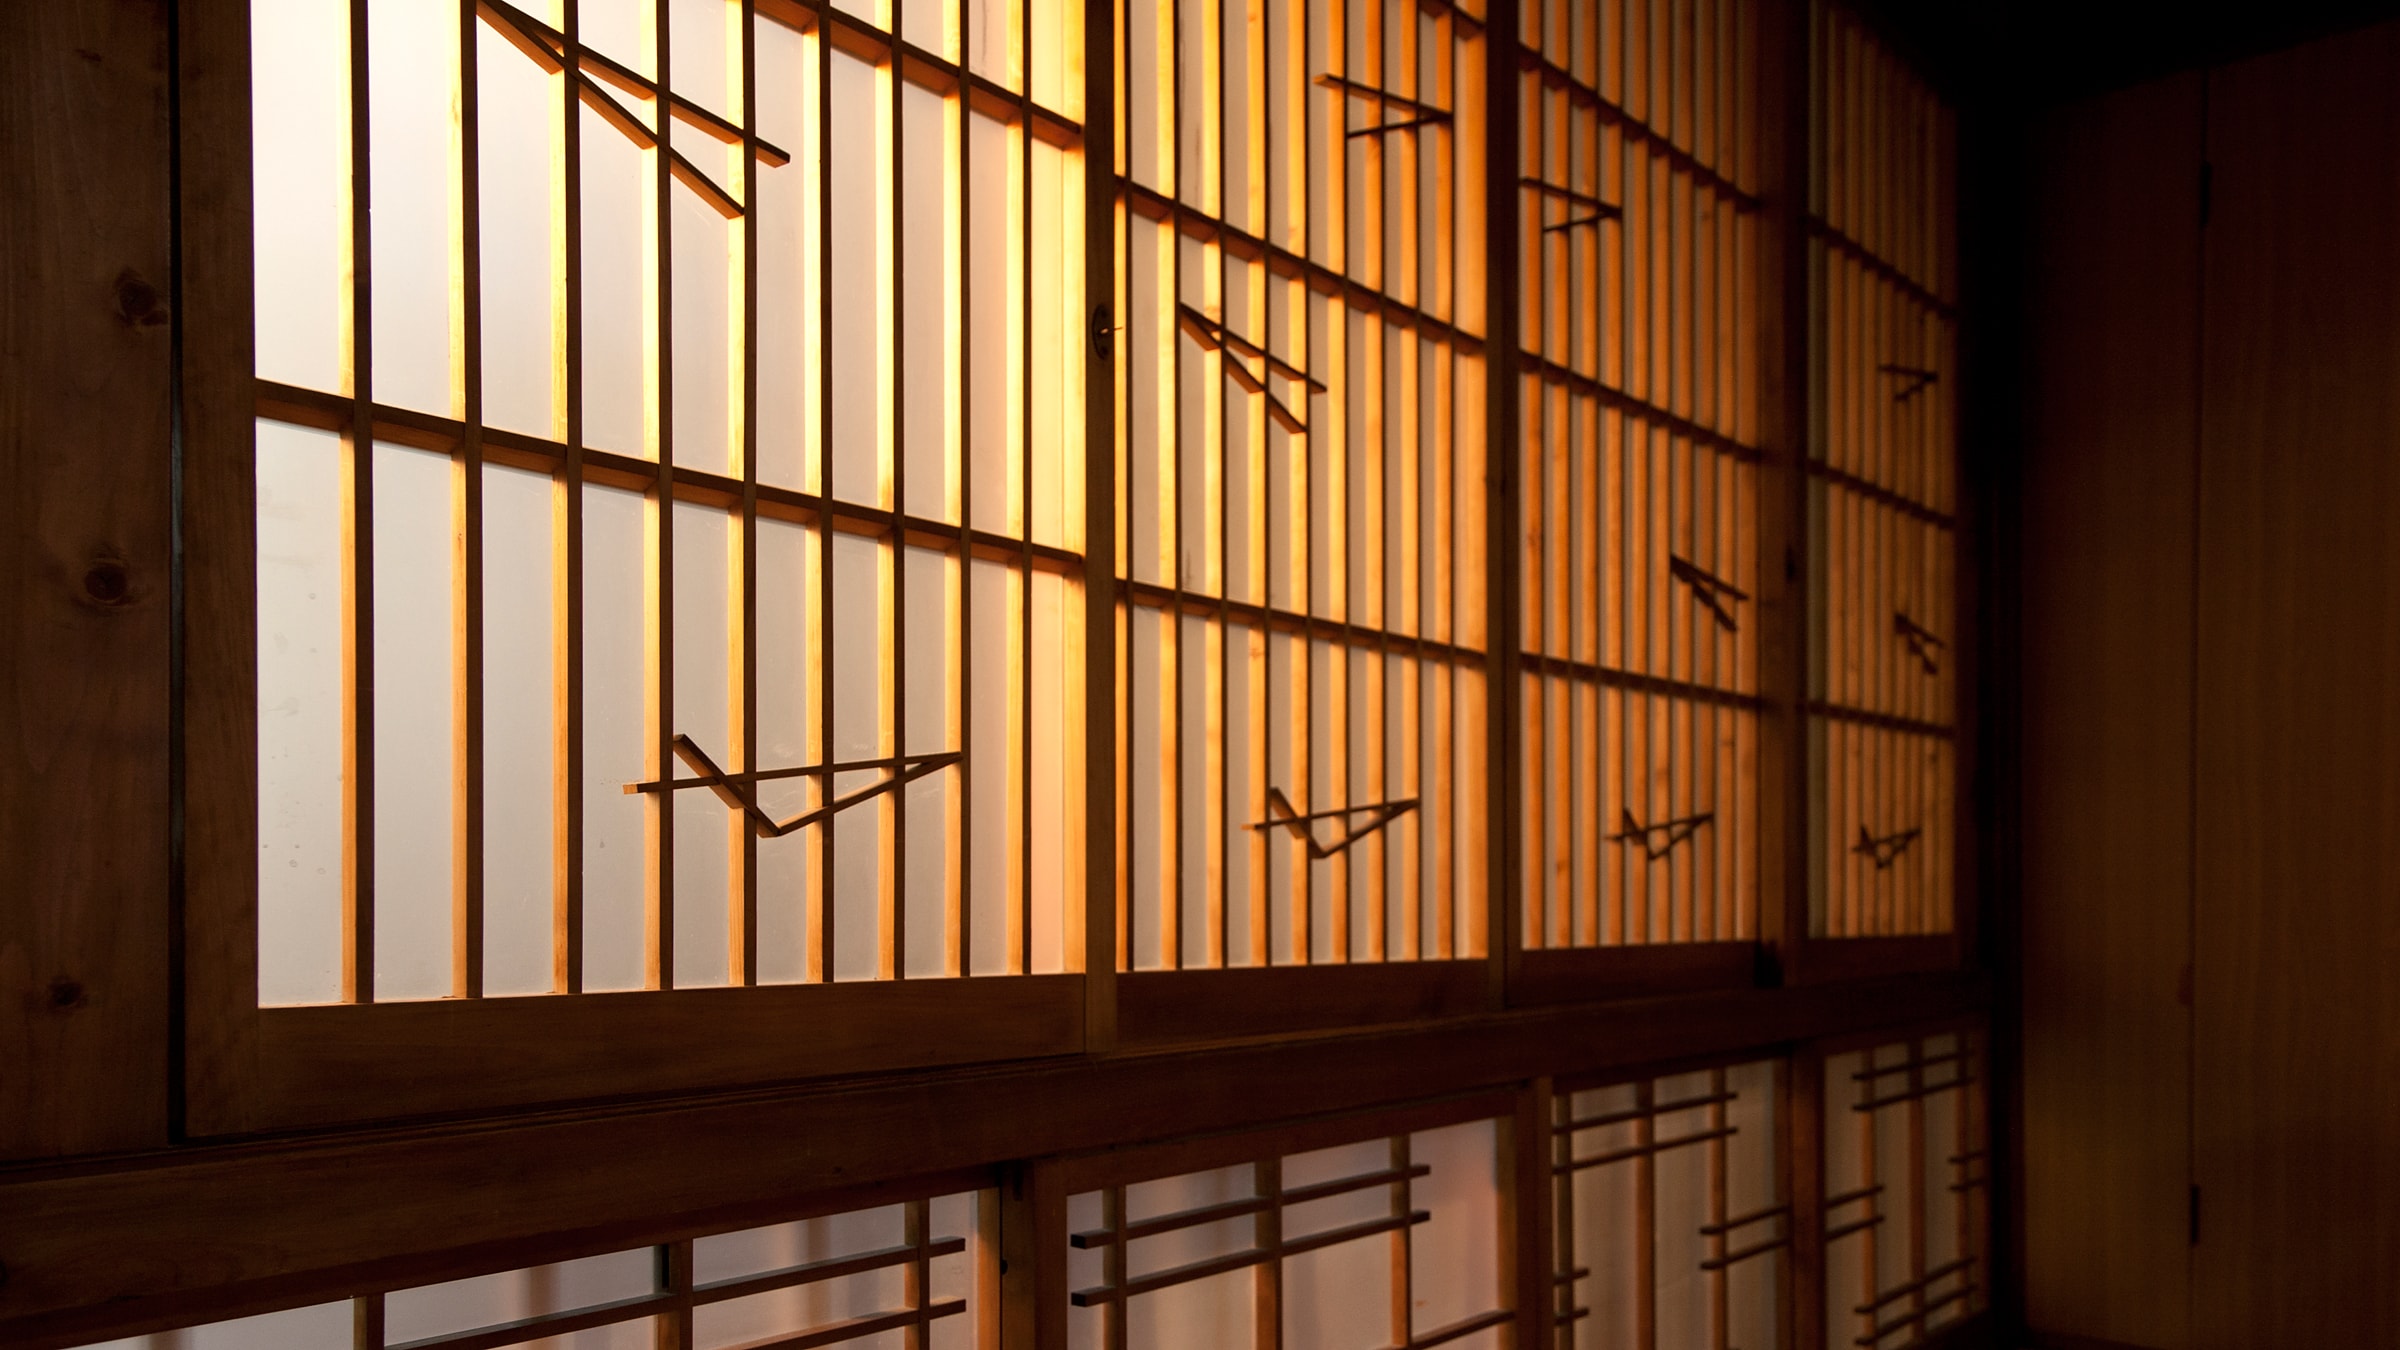 The shoji screens in the rooms are packed with the commitment of craftsmen.